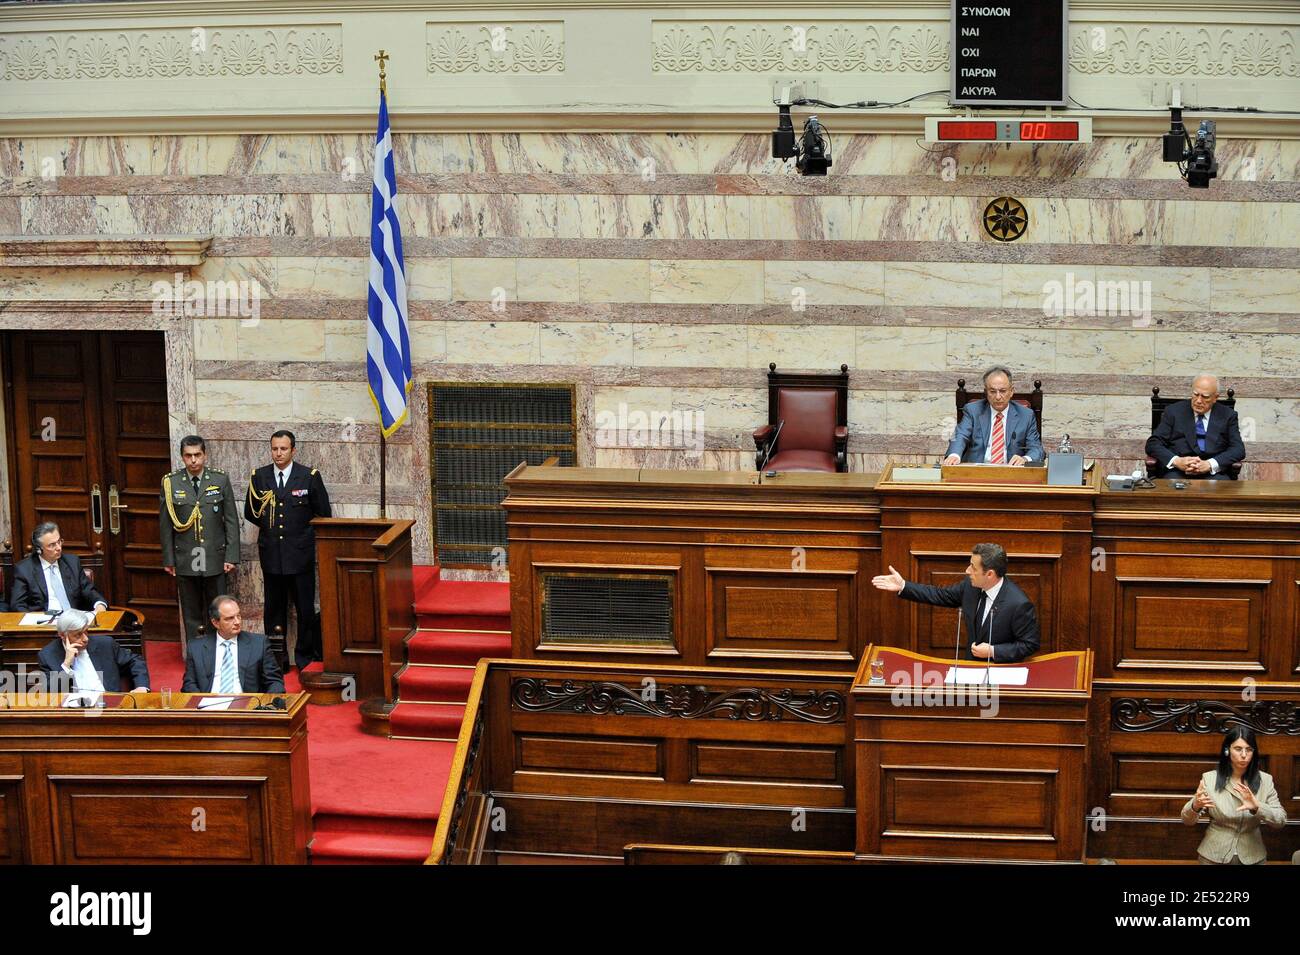 Greek President Karolos Papoulias (Back-R) and speaker of the Greek parliament Dimitri Sioufas (C-back) watch French President Nicolas Sarkozy addressing the parliament in Athens, Greece on June 6, 2008. Sarkozy arrived in Greece Friday for an official visit, the first by a French head of state in more than 25 years. Sarkozy was addressing the Greek parliament in a ceremony only accorded to three foreign presidents in the past: his predecessor Charles de Gaulle and US presidents Dwight Eisenhower and George Bush Sr. Photo by Mousse/ABACAPRESS.COM Stock Photo